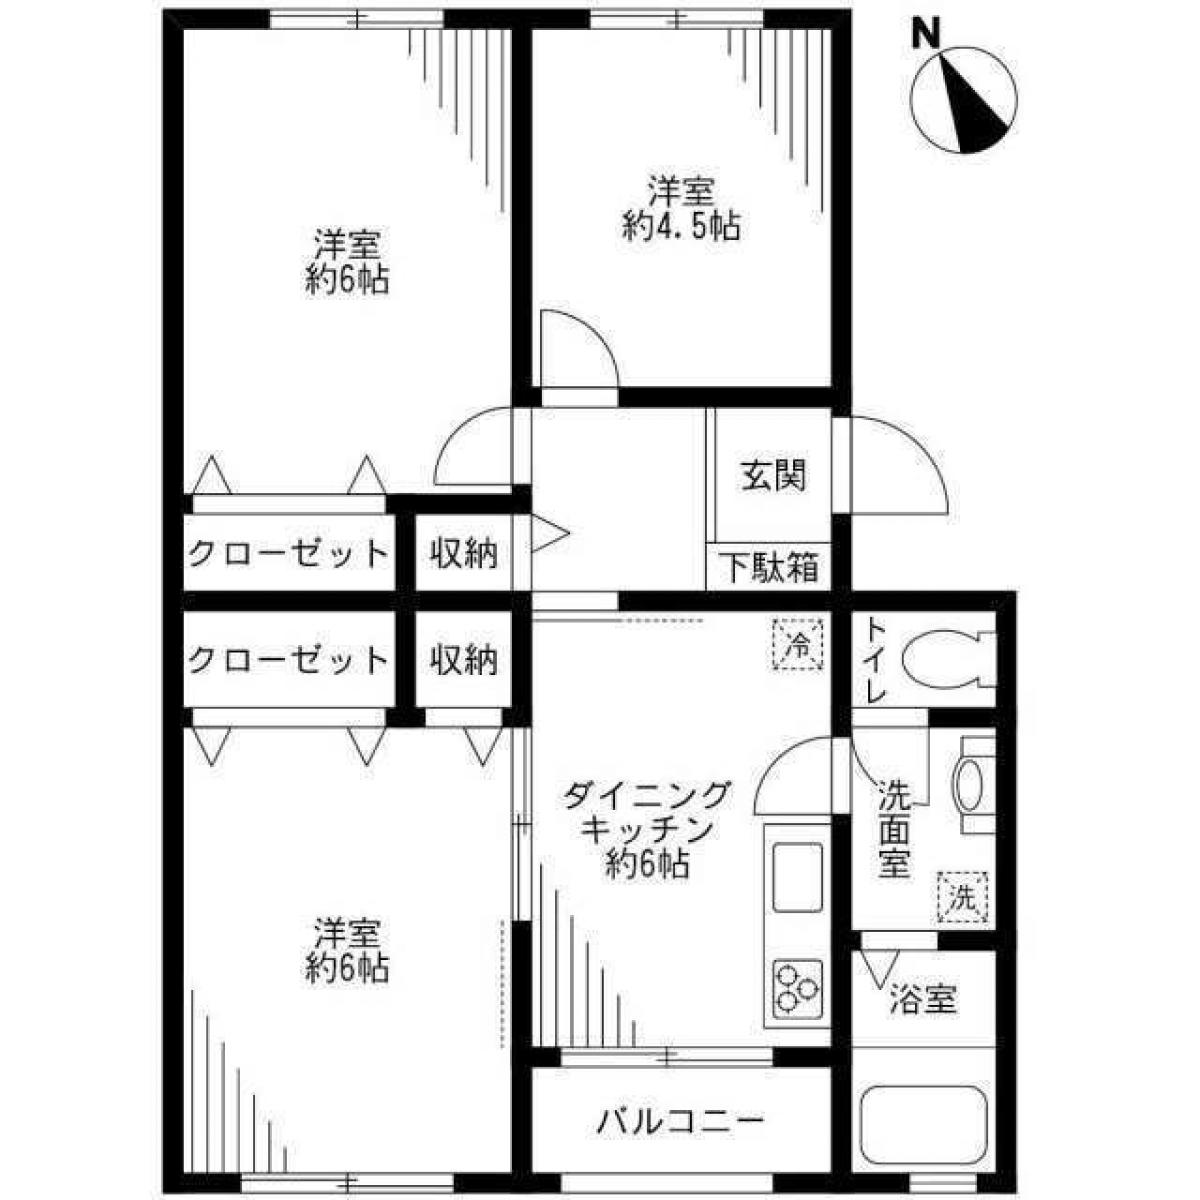 Picture of Apartment For Sale in Hachioji Shi, Tokyo, Japan